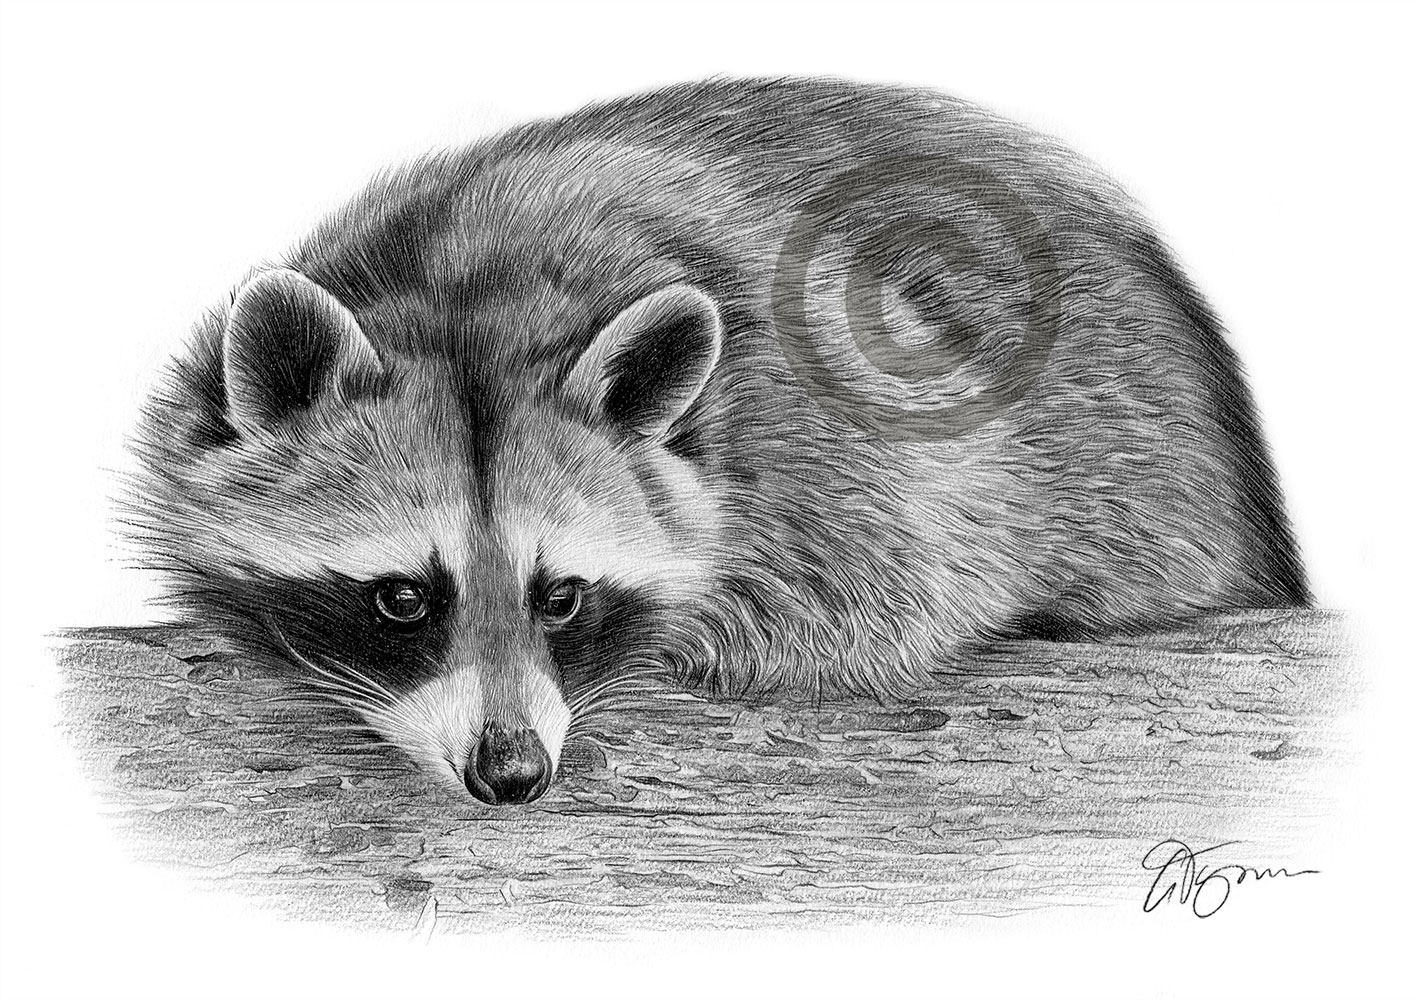 Pencil drawing of an adult raccoon by artist Gary Tymon